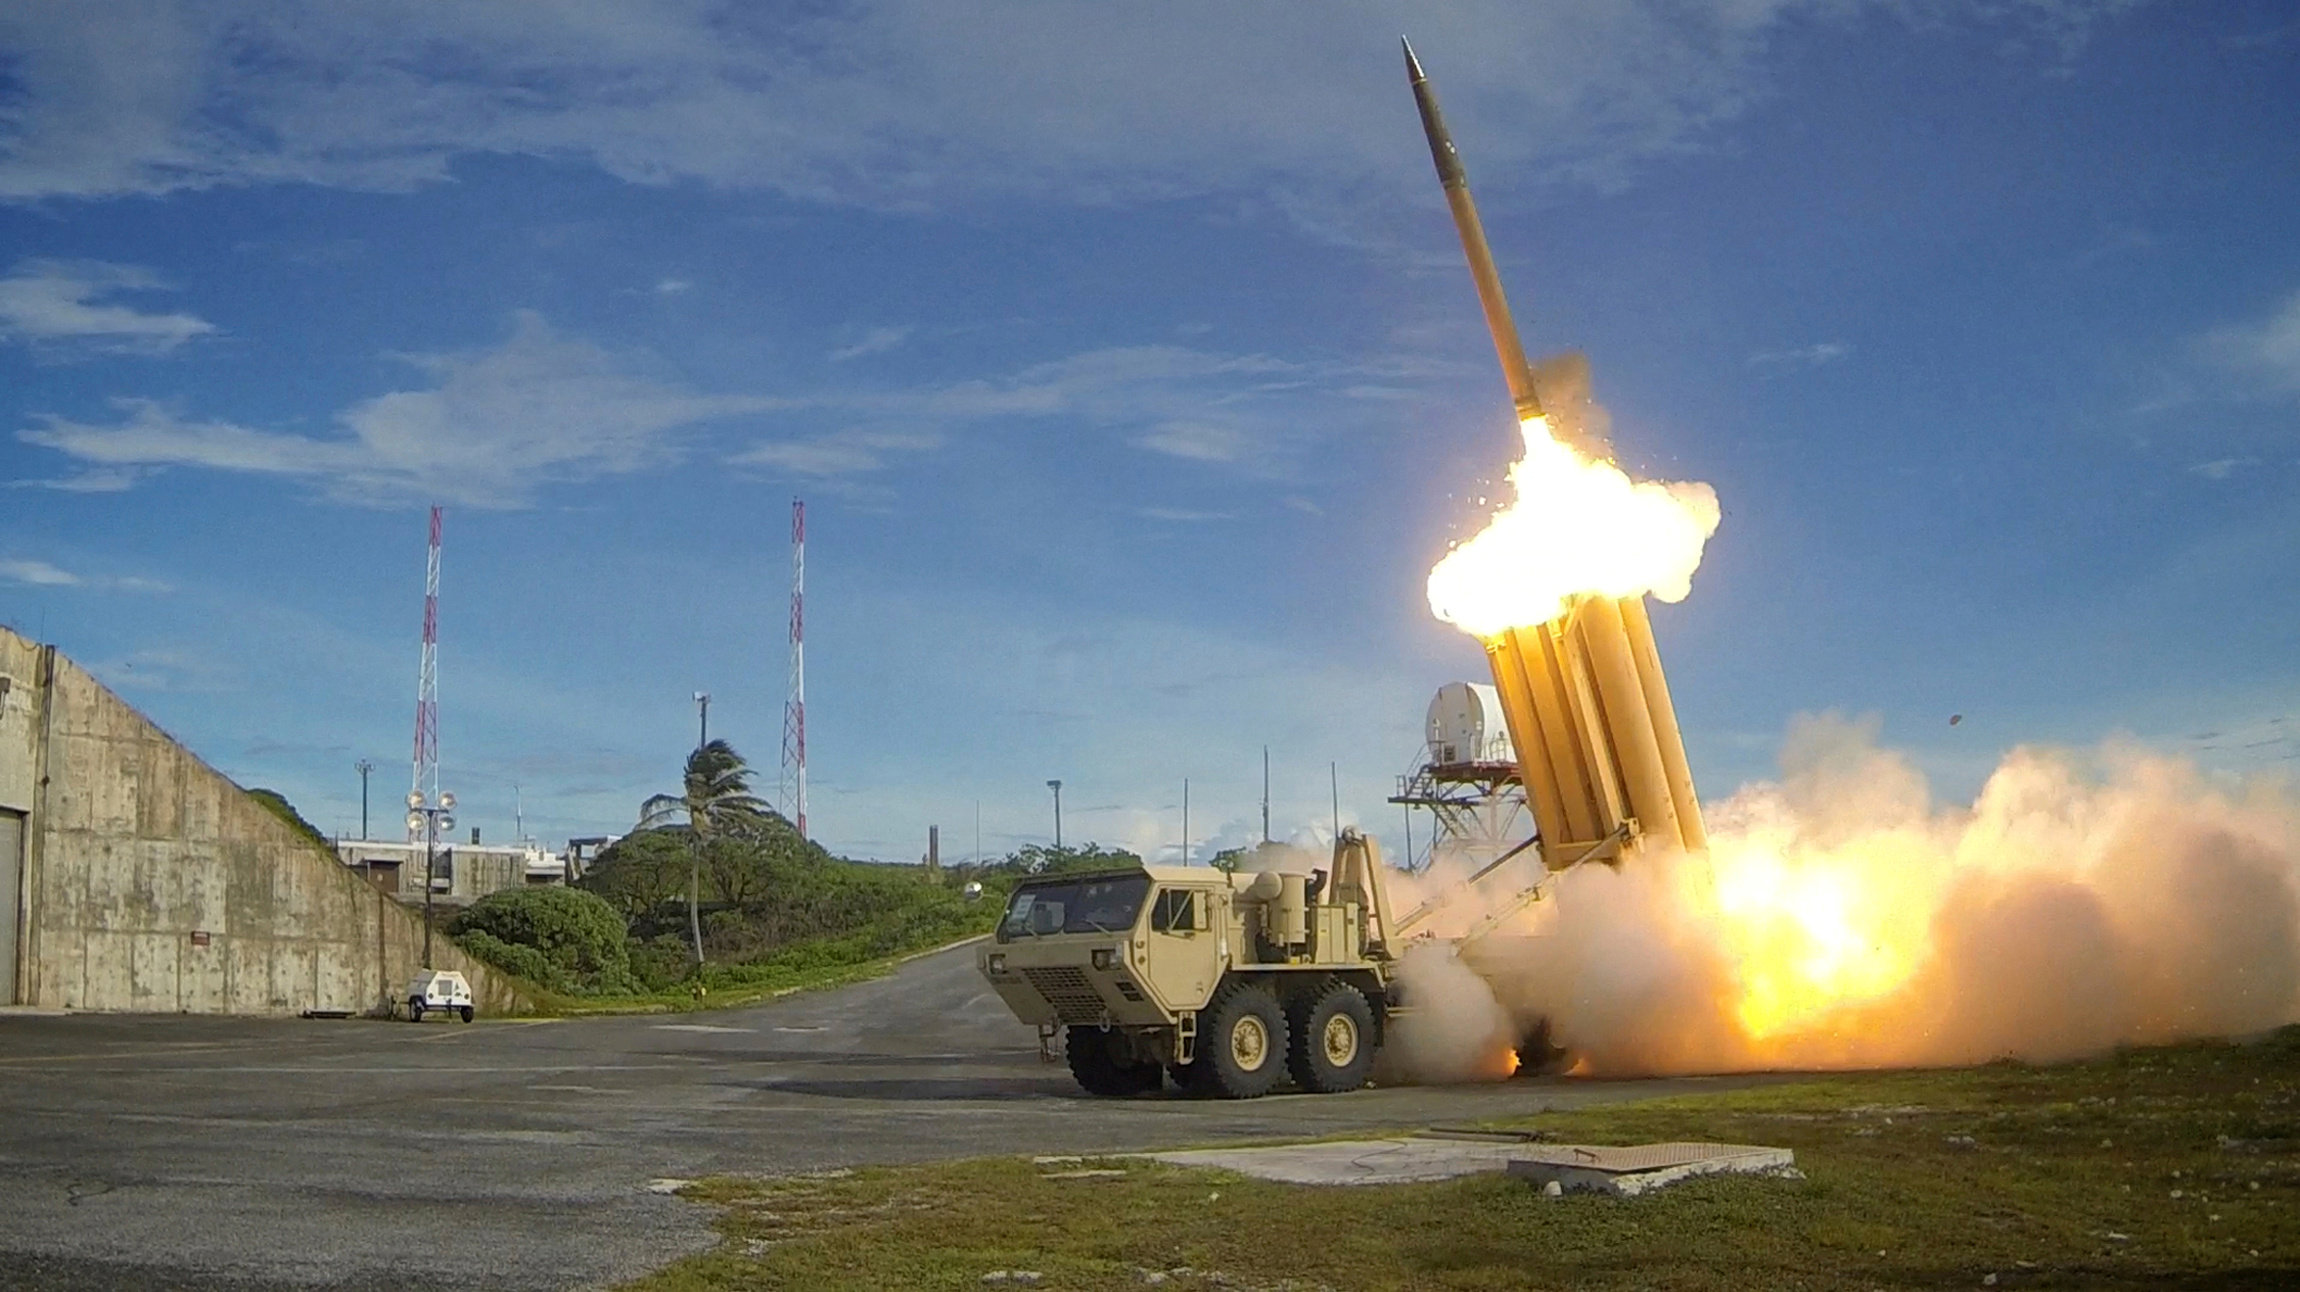 FILE PHOTO - A Terminal High Altitude Area Defense (THAAD) interceptor is launched during a successful intercept test, in this undated handout photo provided by the U.S. Department of Defense, Missile Defense Agency. U.S. Department of Defense, Missile De